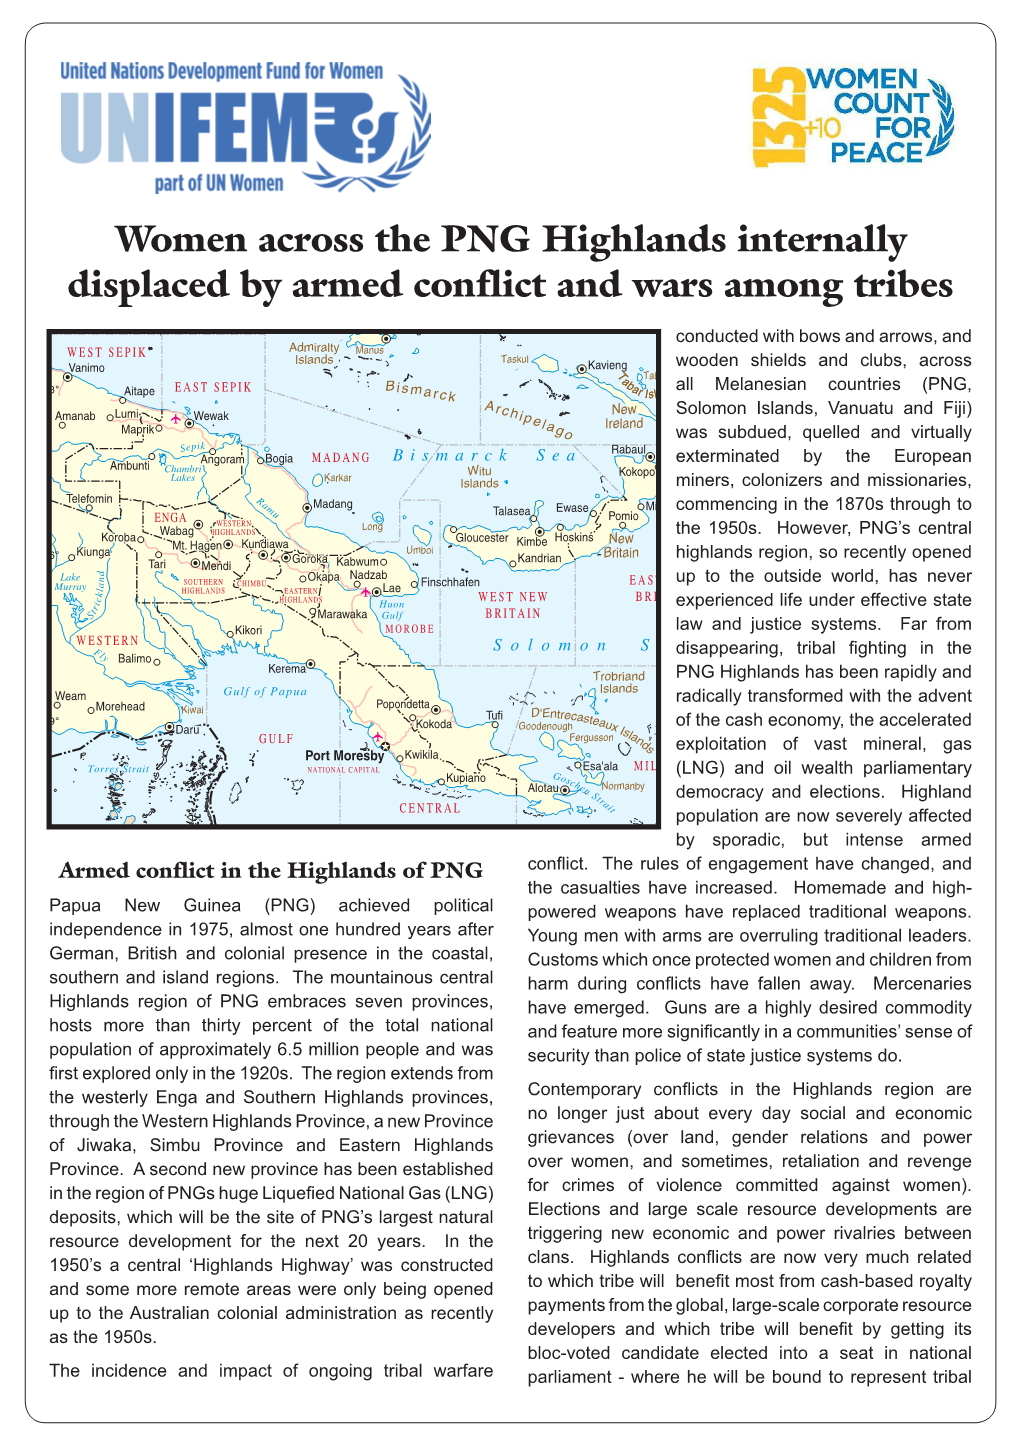 Women Across the PNG Highlands Internally Displaced by Armed